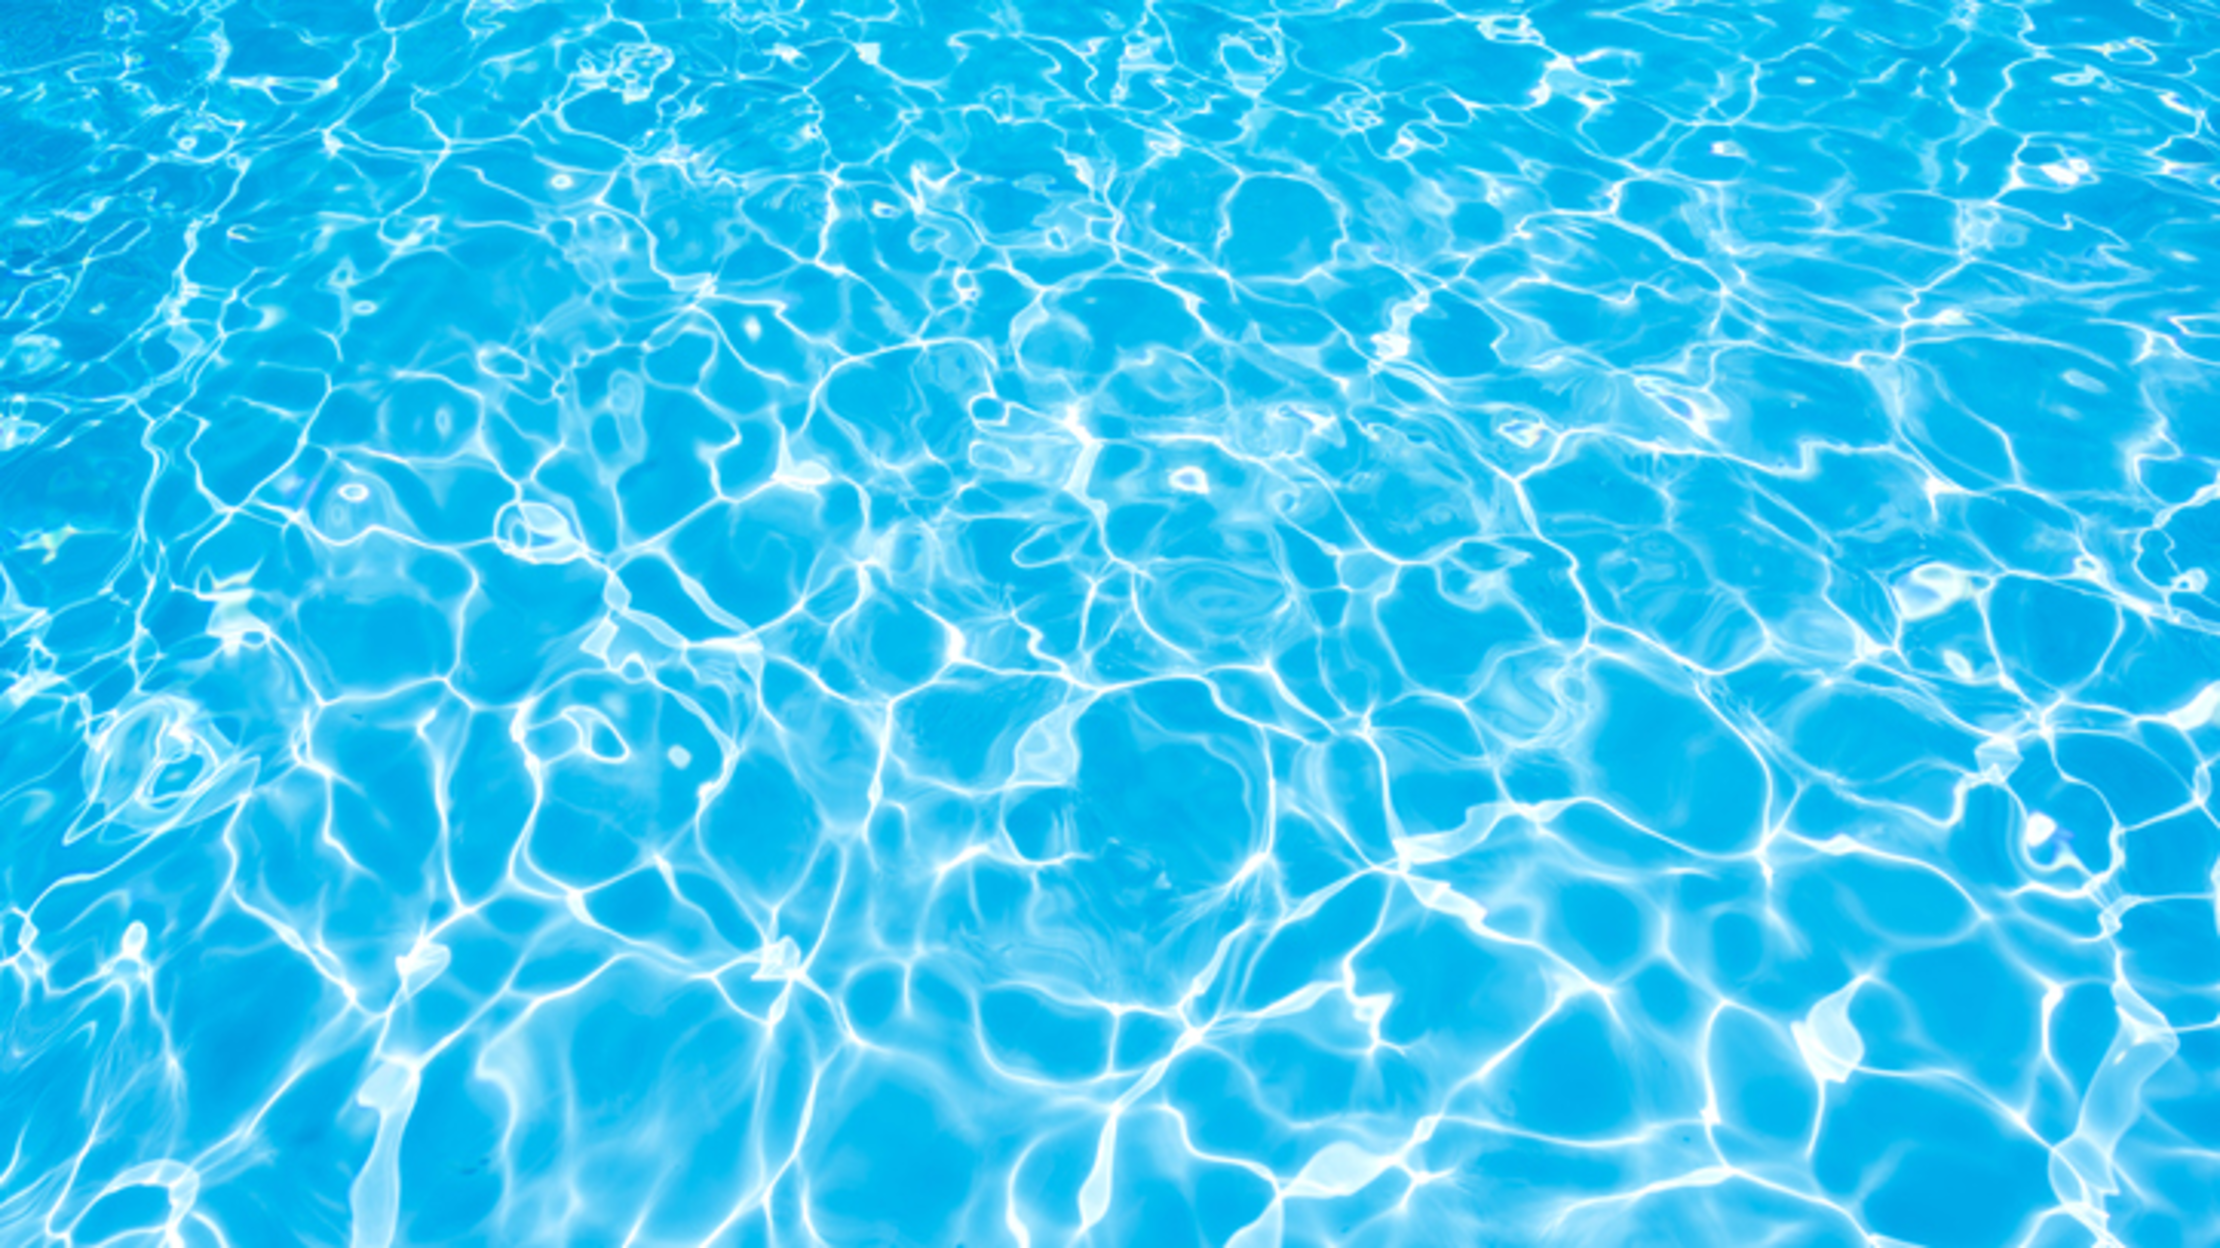 Scientists Can Measure Exactly How Much Pee Is In The Pool Mental Floss